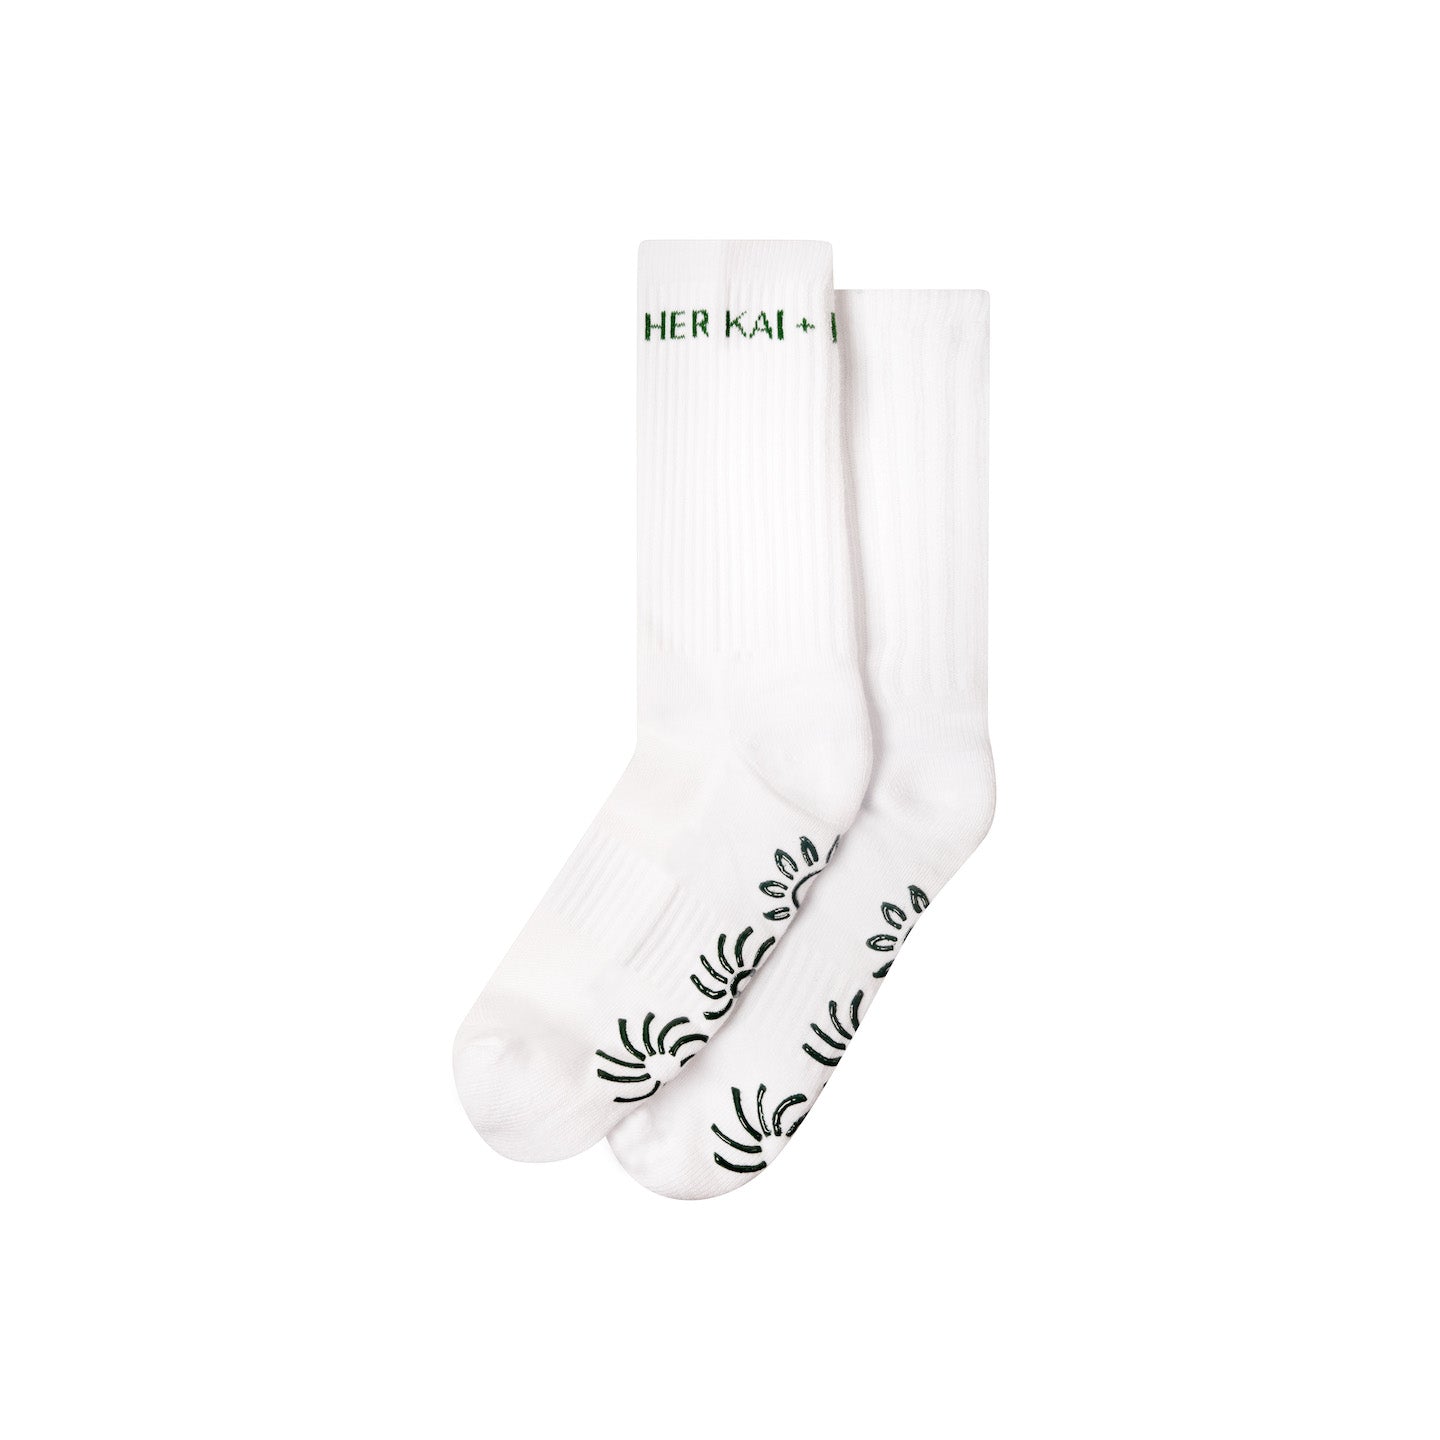 Sol Cotton Socks in White by Her Kai & I. It features our Sun Grip design in Forest Green